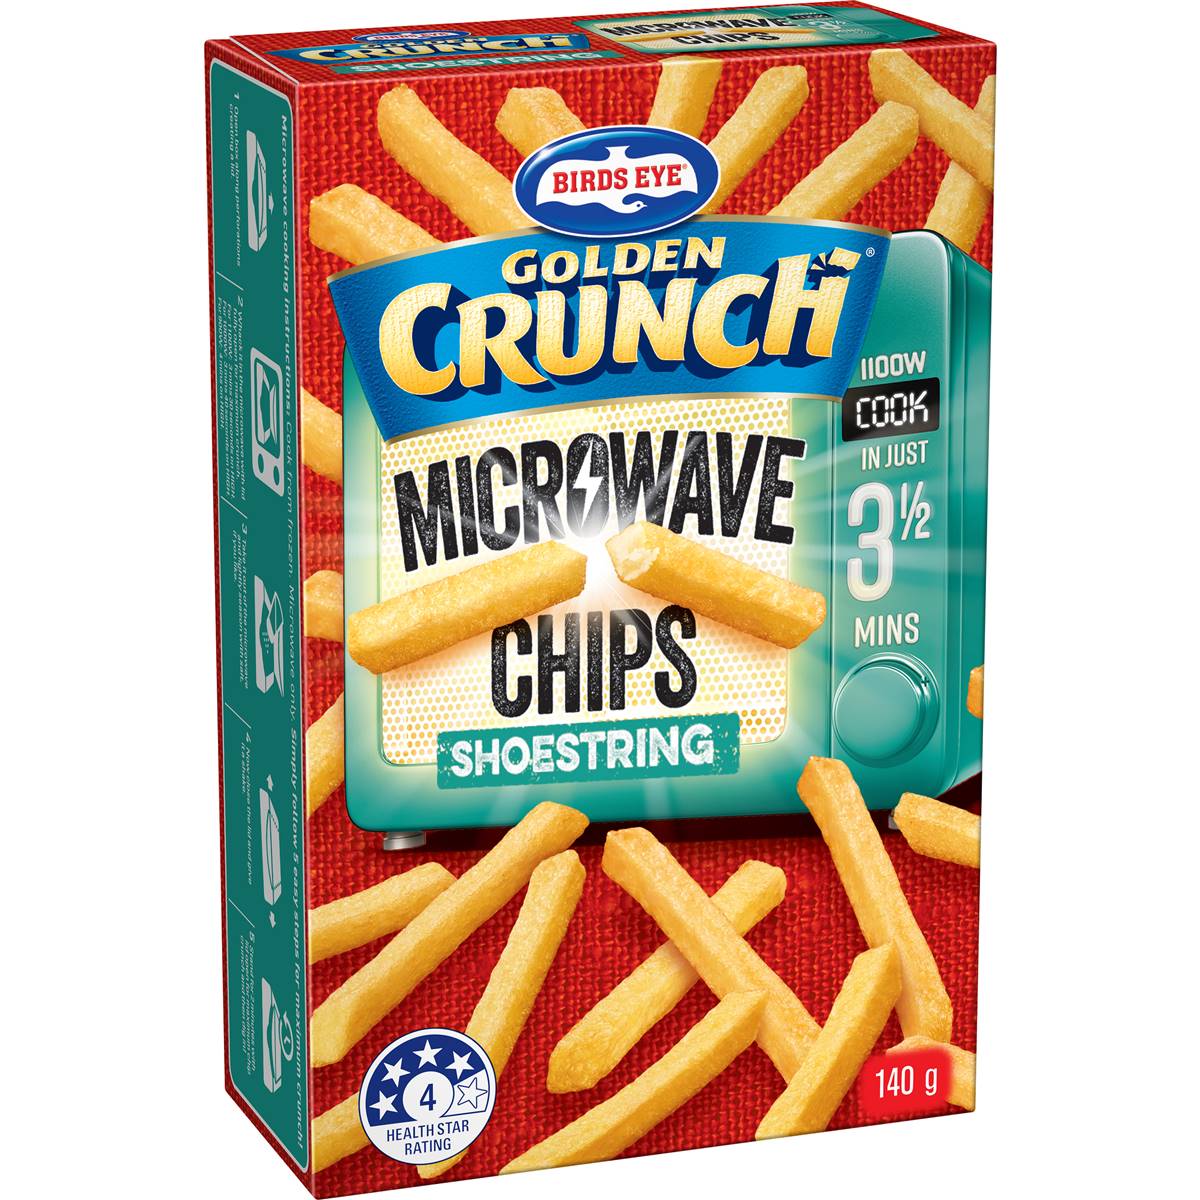 Calories in Birds Eye Microwave Chips Shoestring